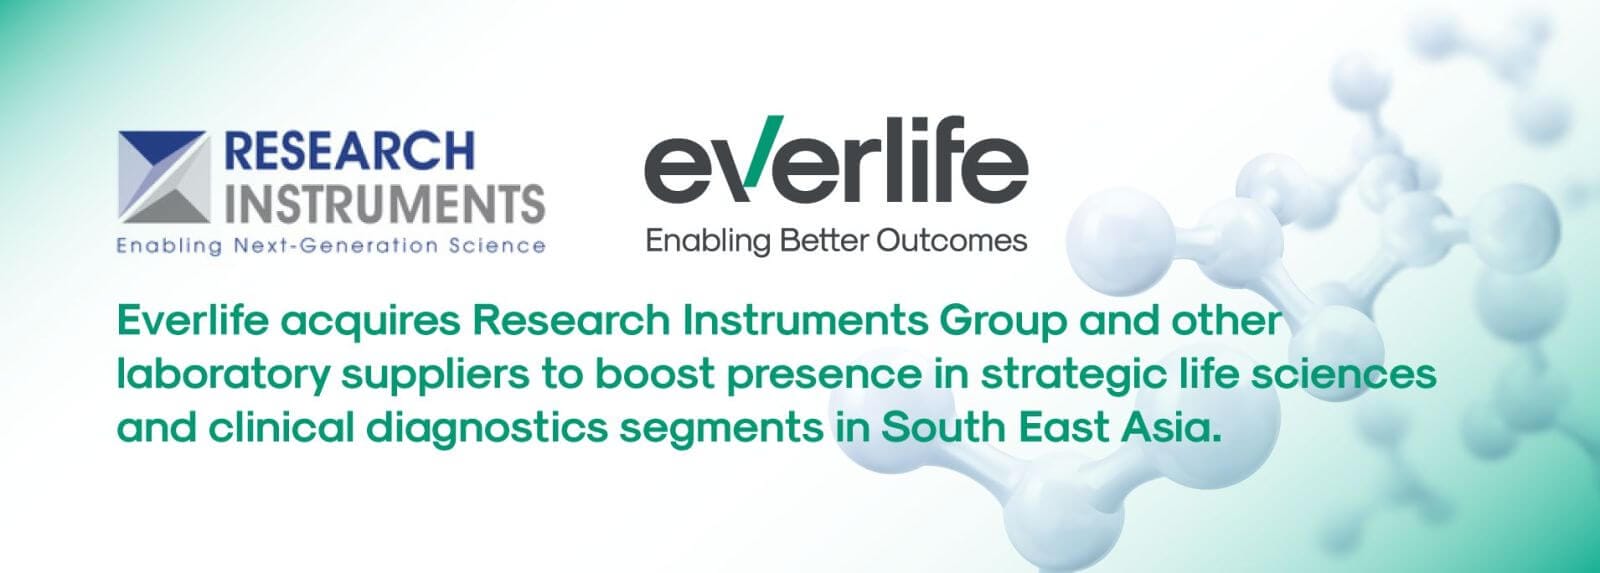 research instruments everlife